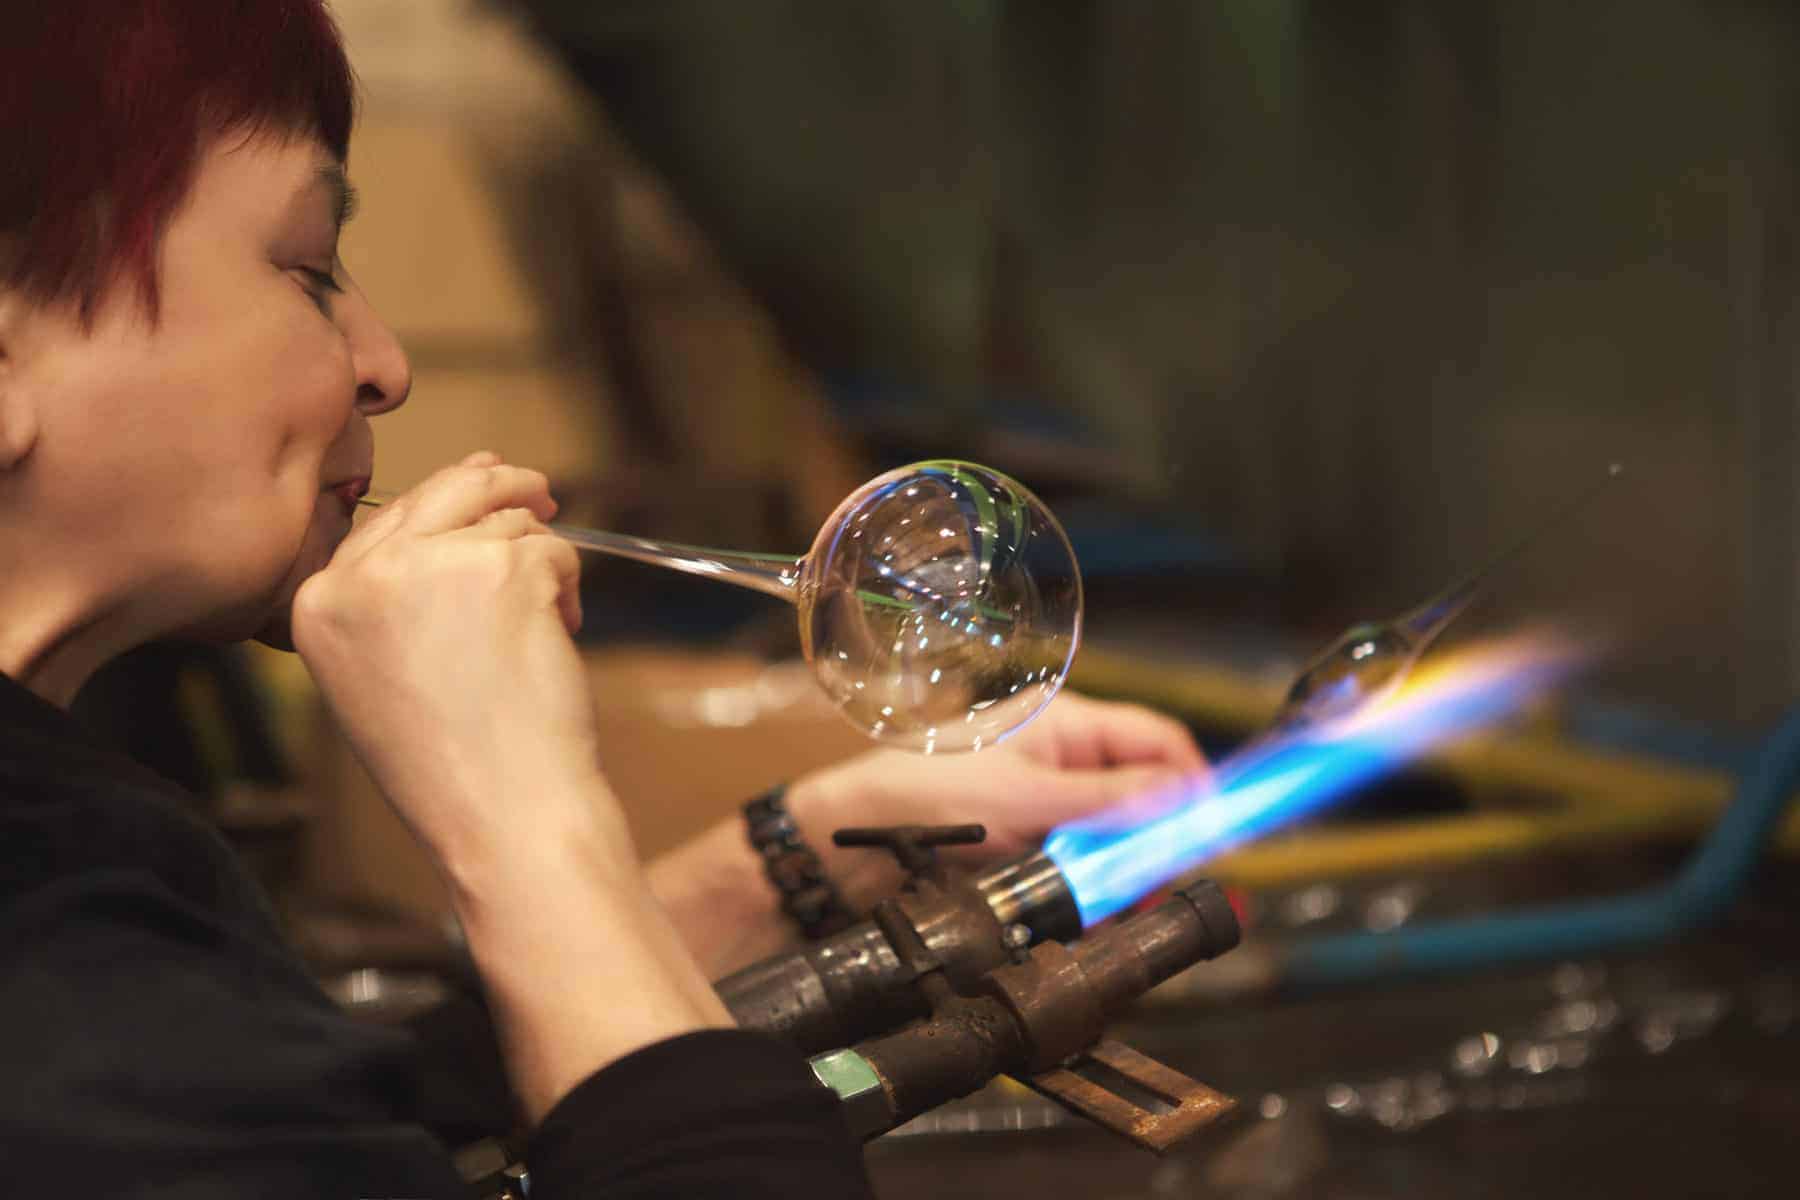 Glass blowing process. Blowing glass pipes